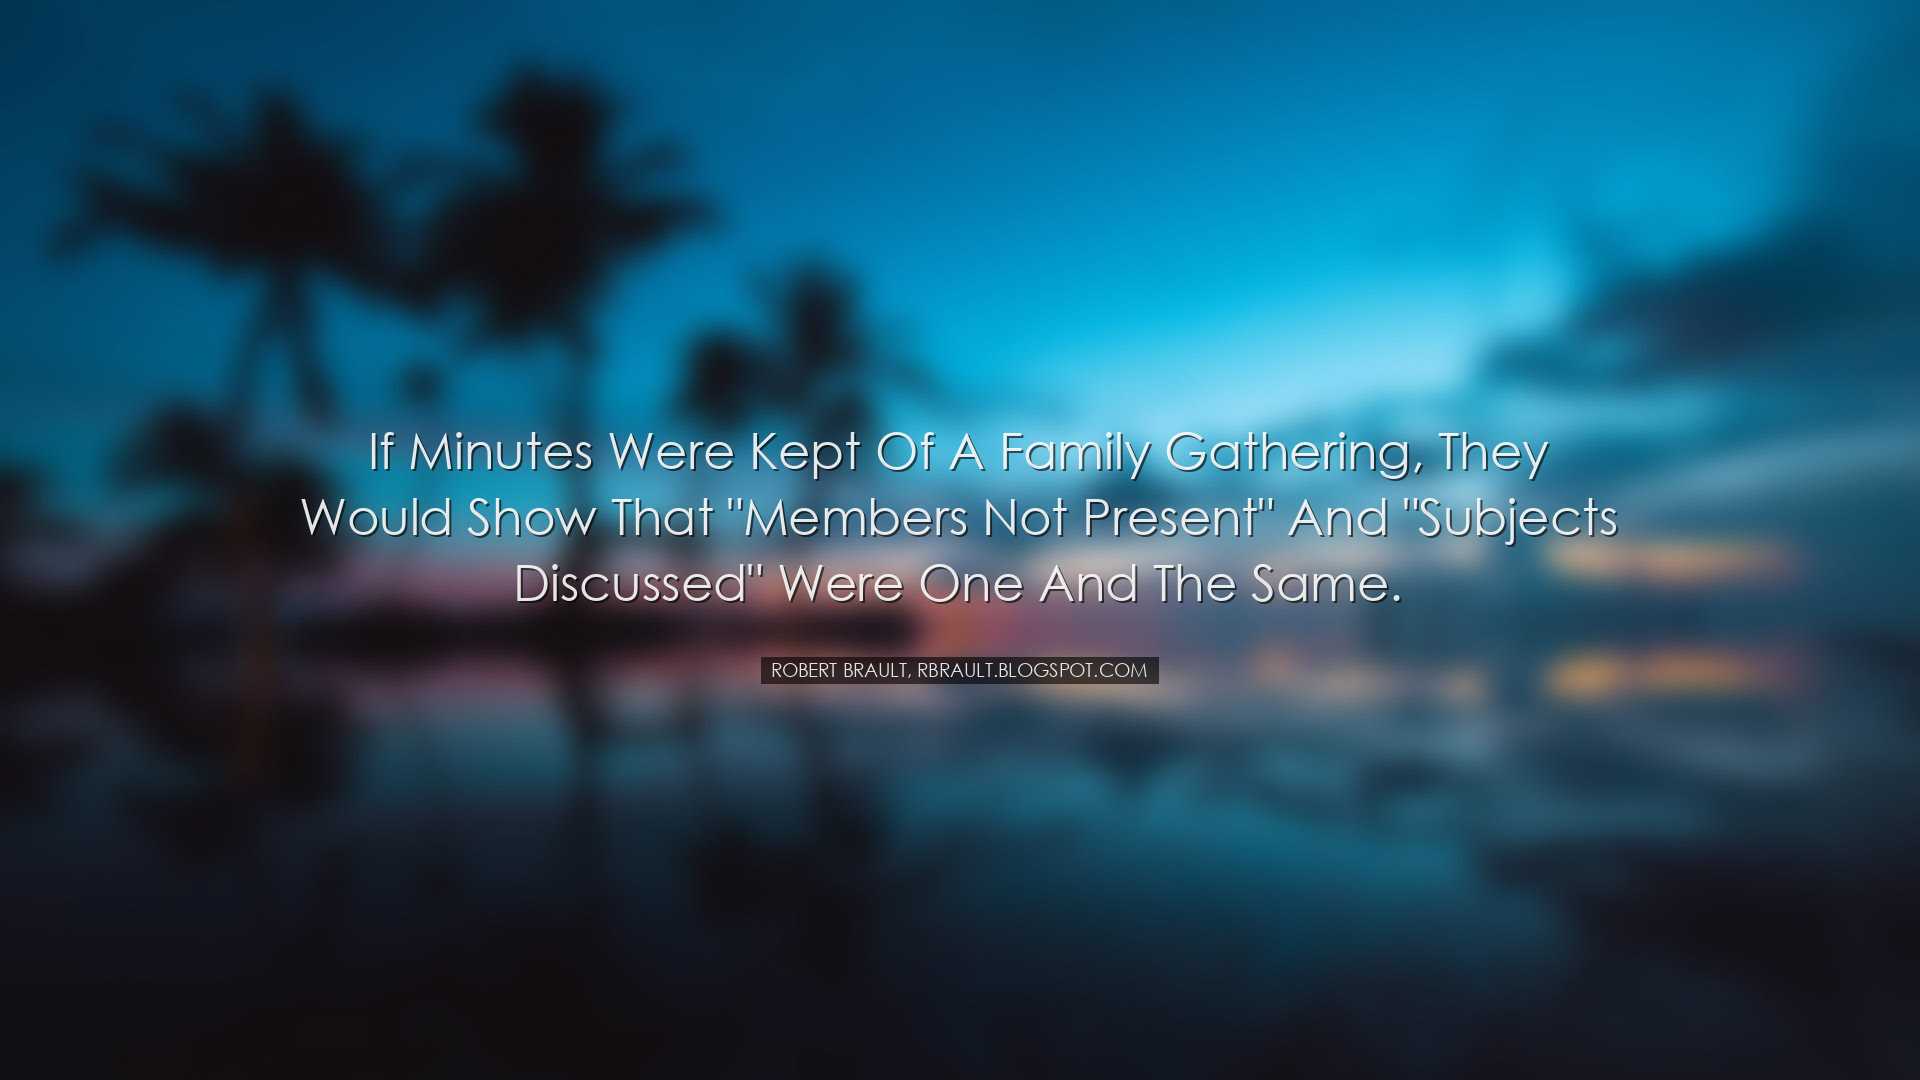 If minutes were kept of a family gathering, they would show that 